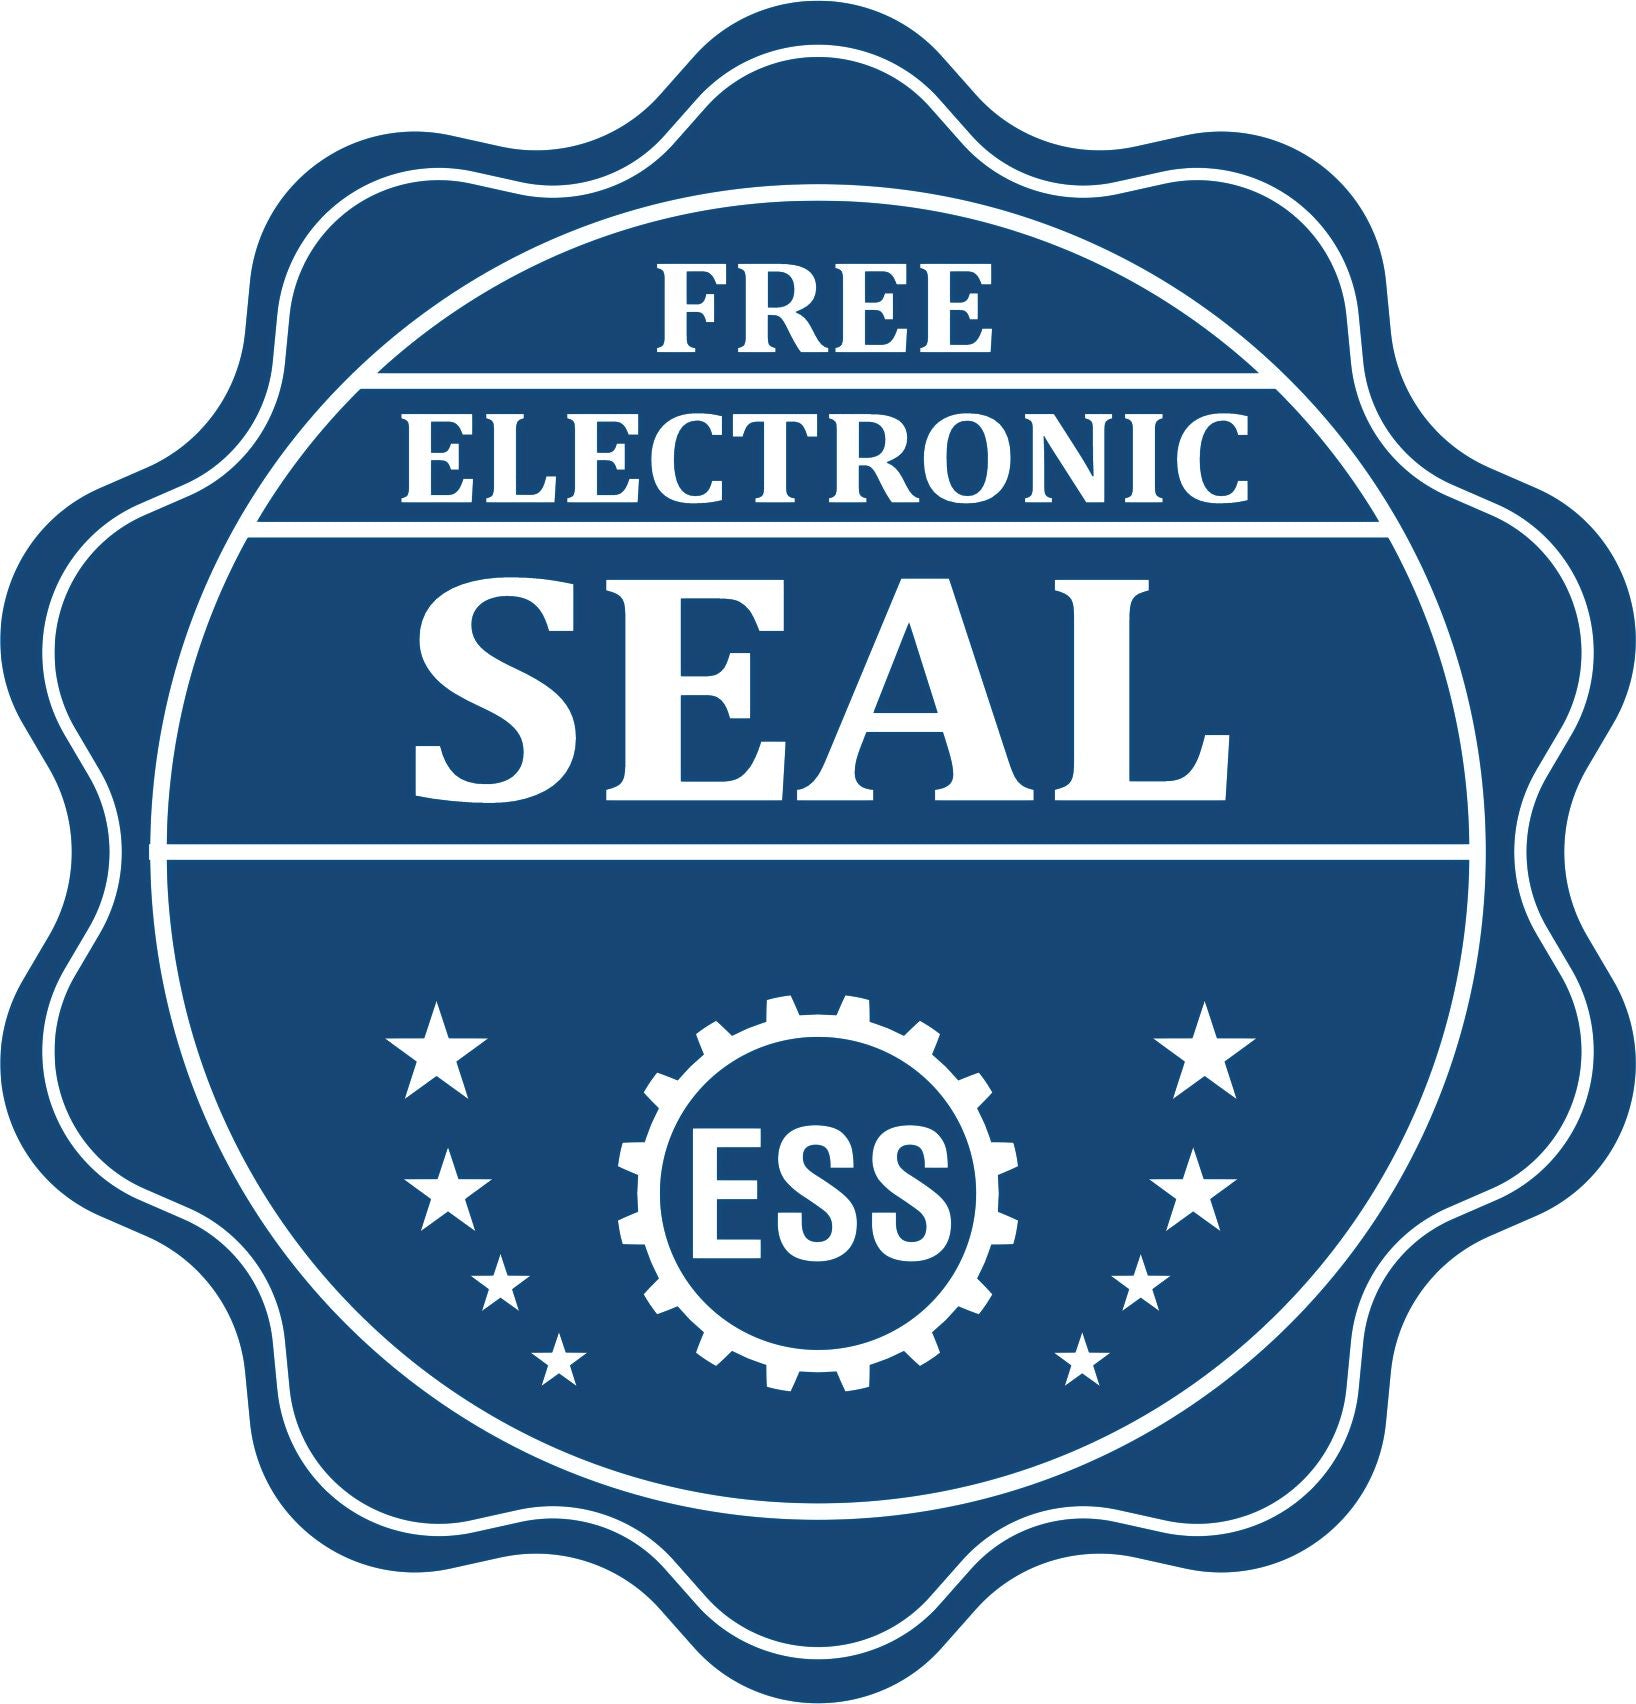 A badge showing a free electronic seal for the Extended Long Reach Idaho Surveyor Embosser with stars and the ESS gear on the emblem.